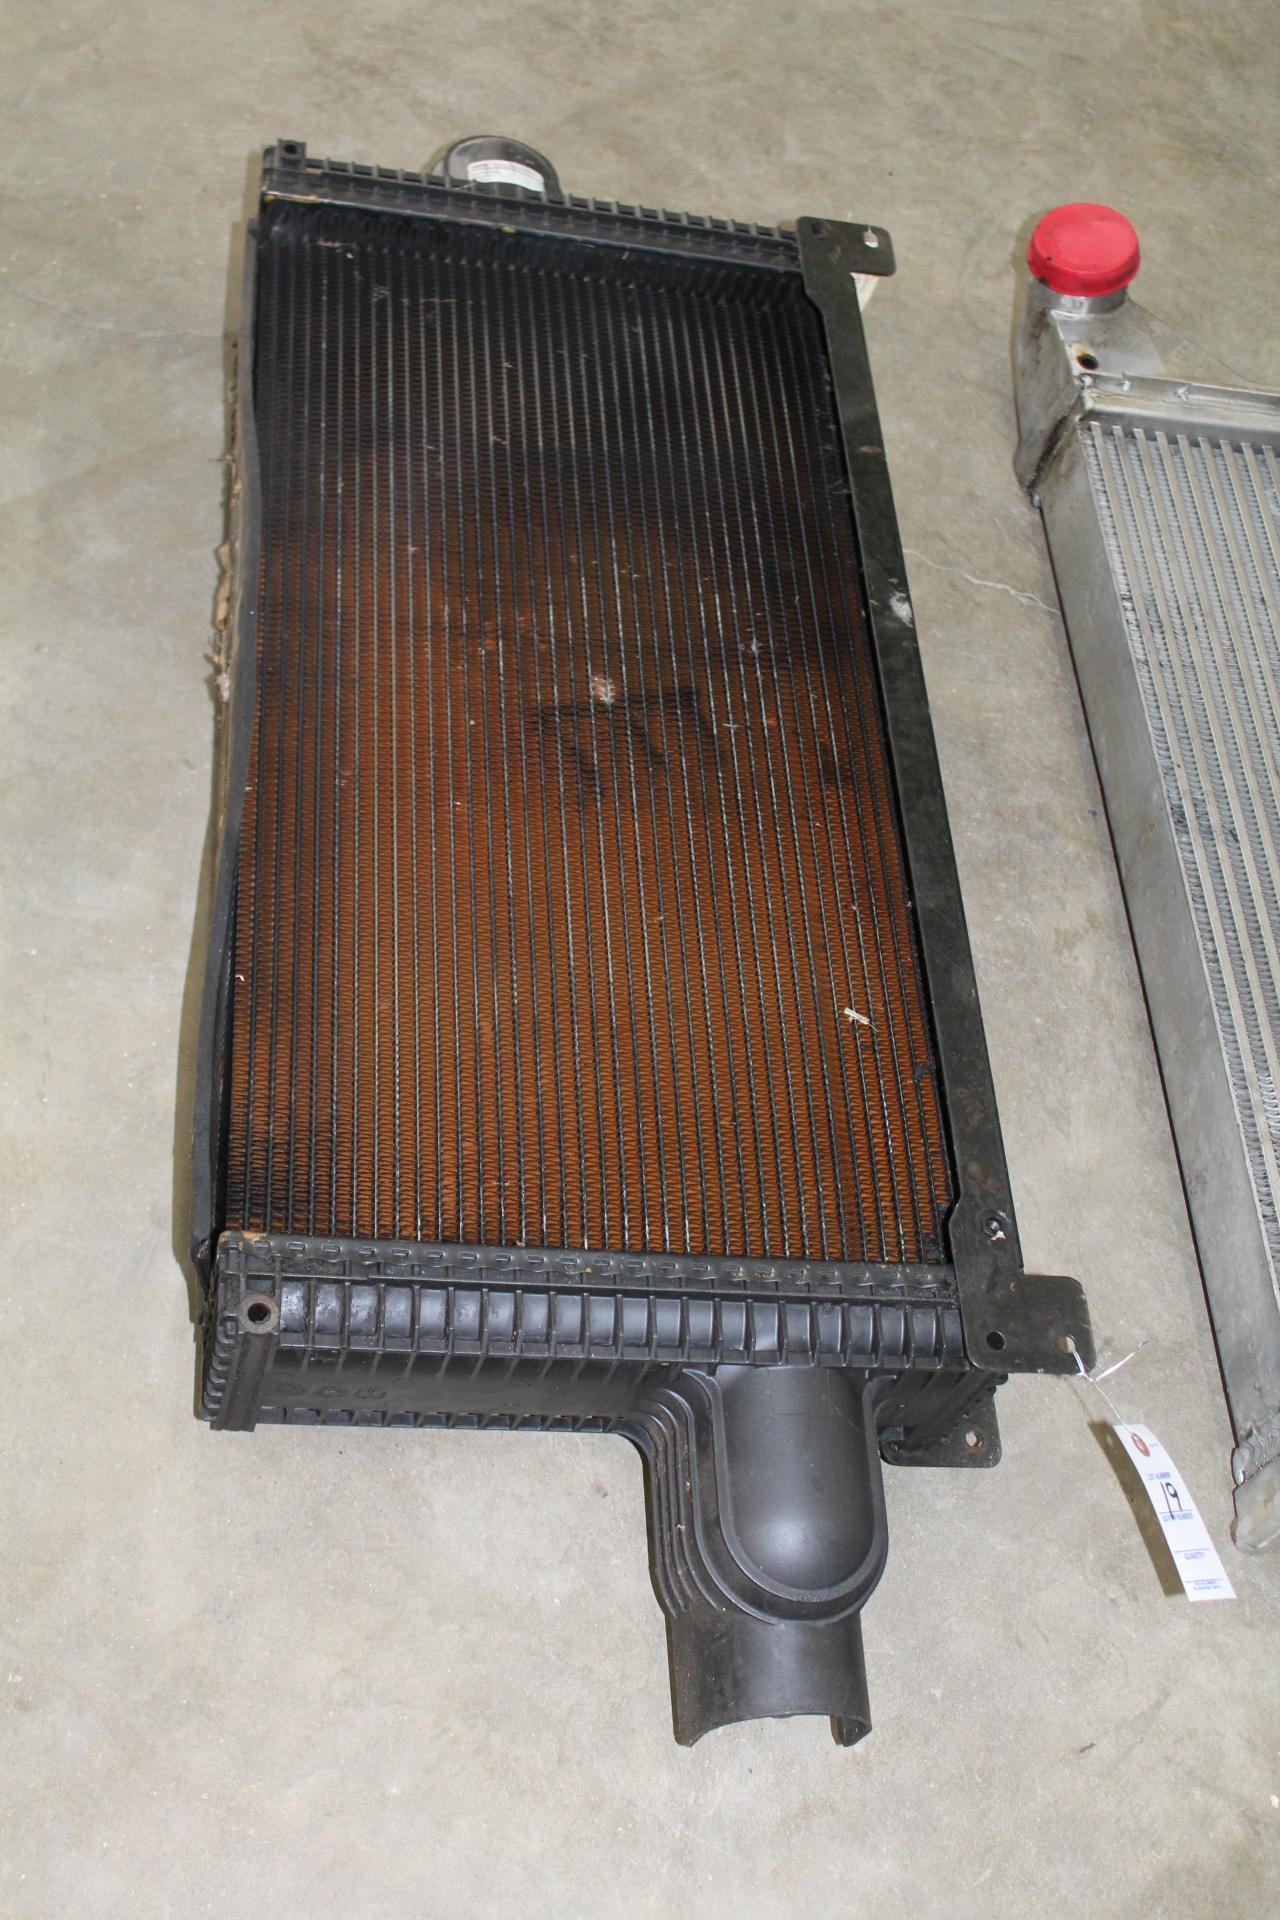 JD 8110 RADIATOR, TAX OR SIGN ST3 FORM